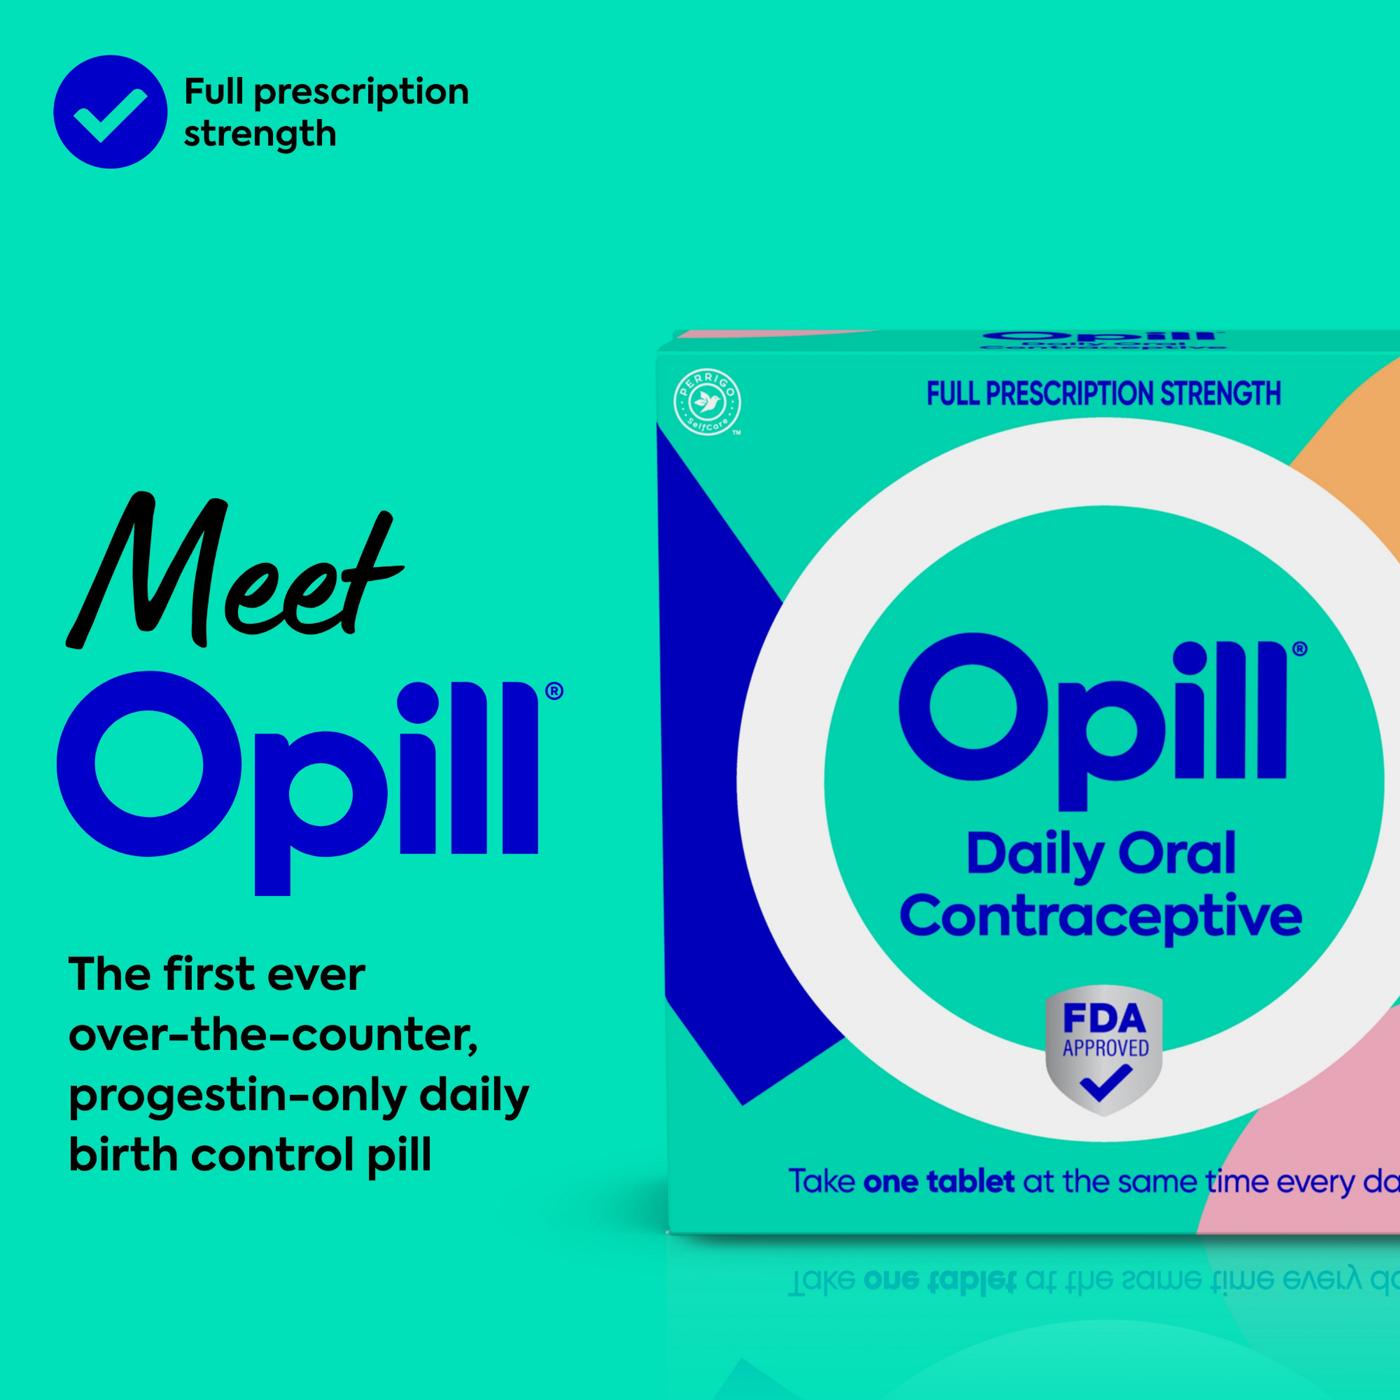 Opill Daily Oral Contraceptive Norgestrel Tablets - 0.075 mg; image 4 of 11